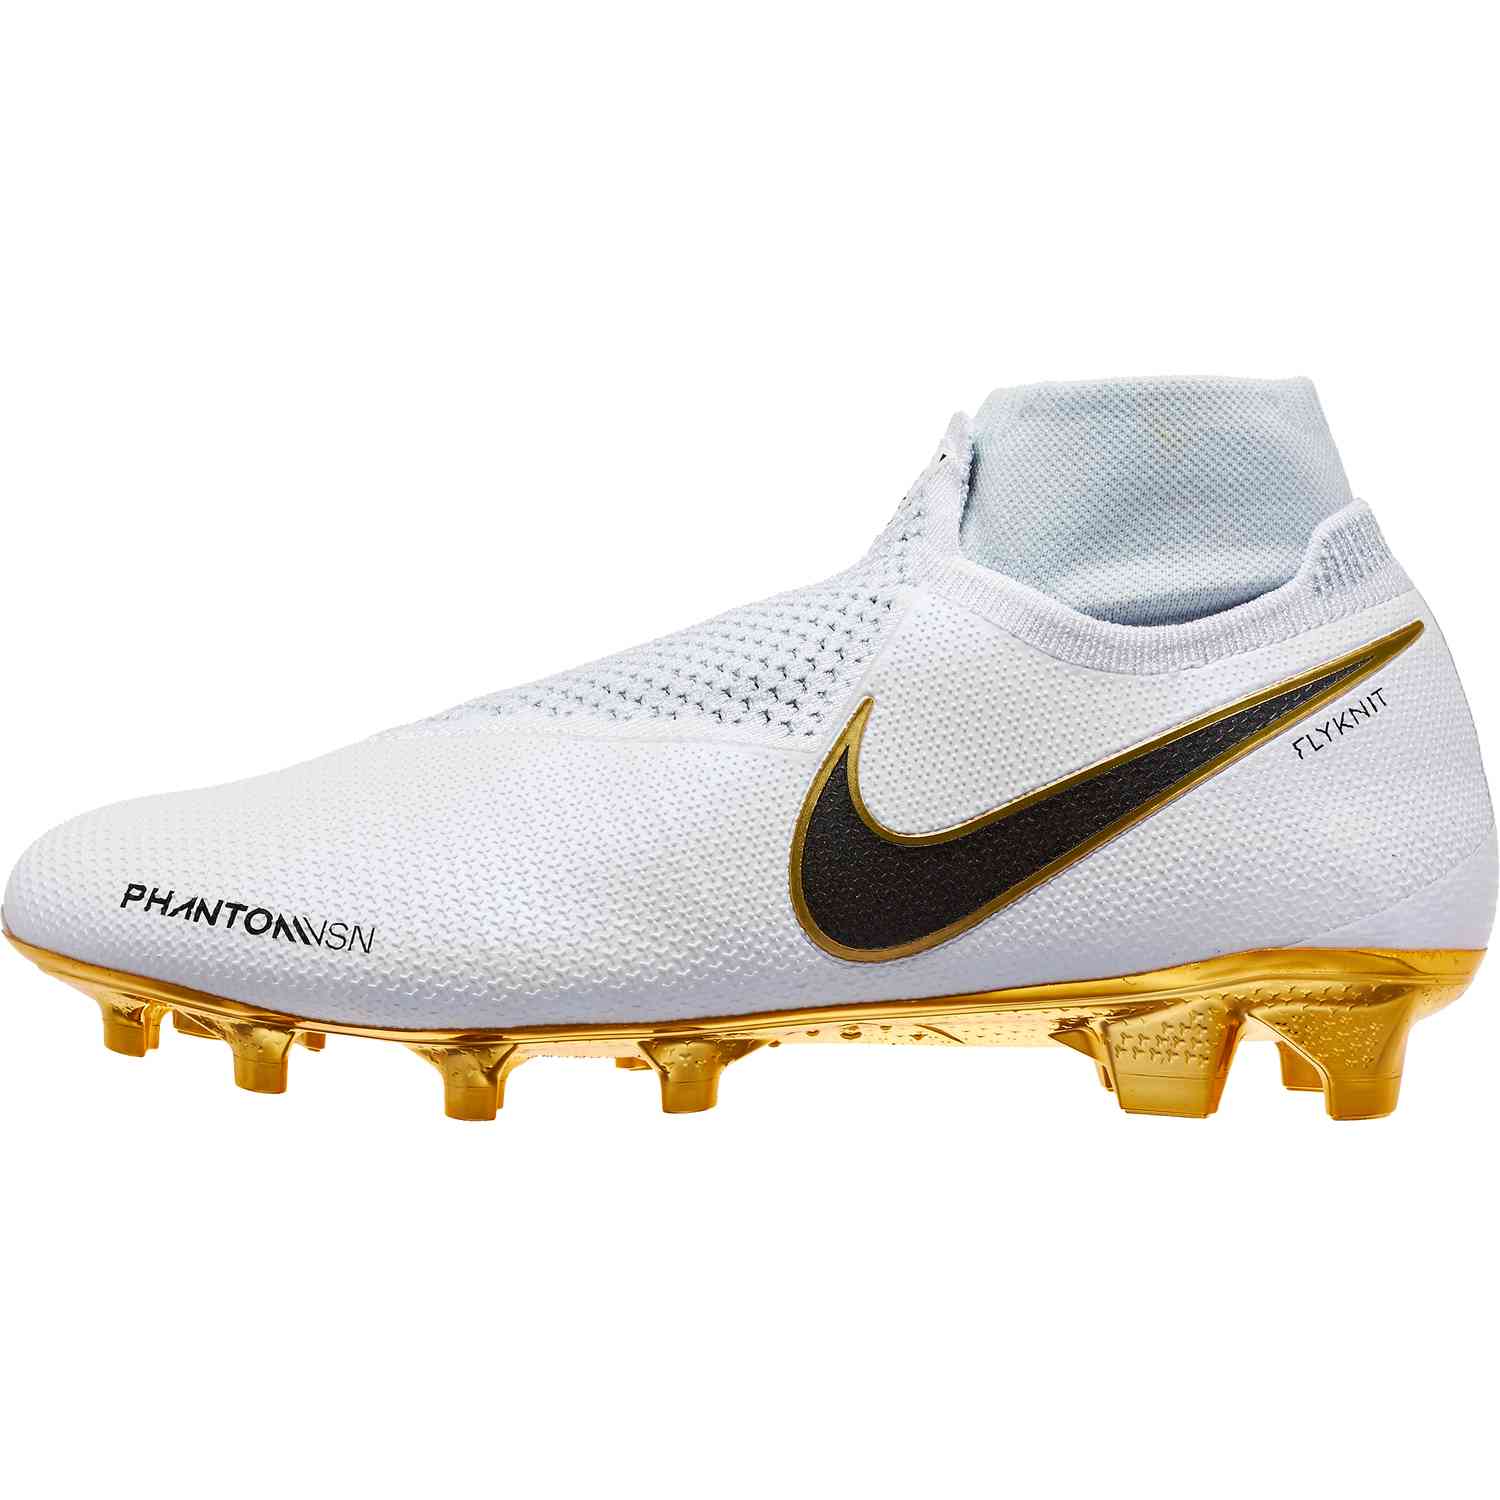 white nike cleats soccer